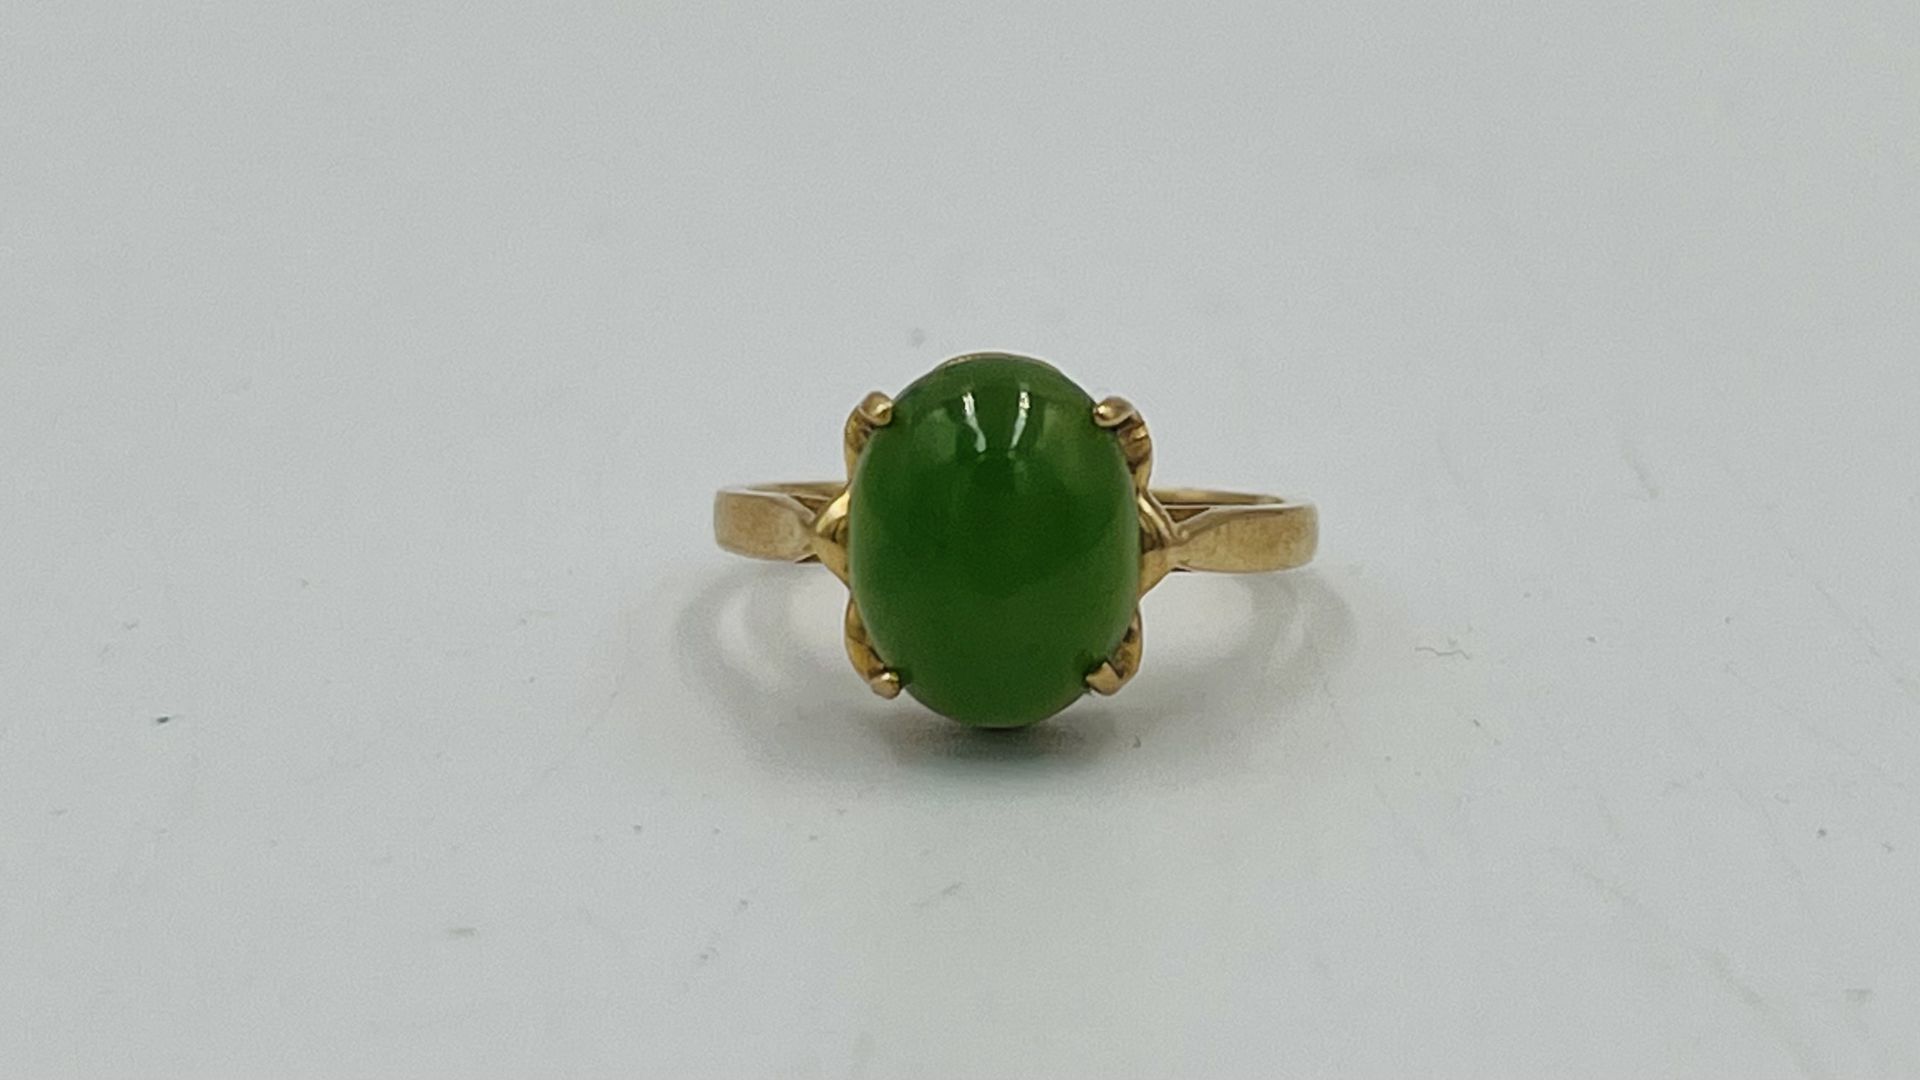 10ct gold ring set with a jade cabochon